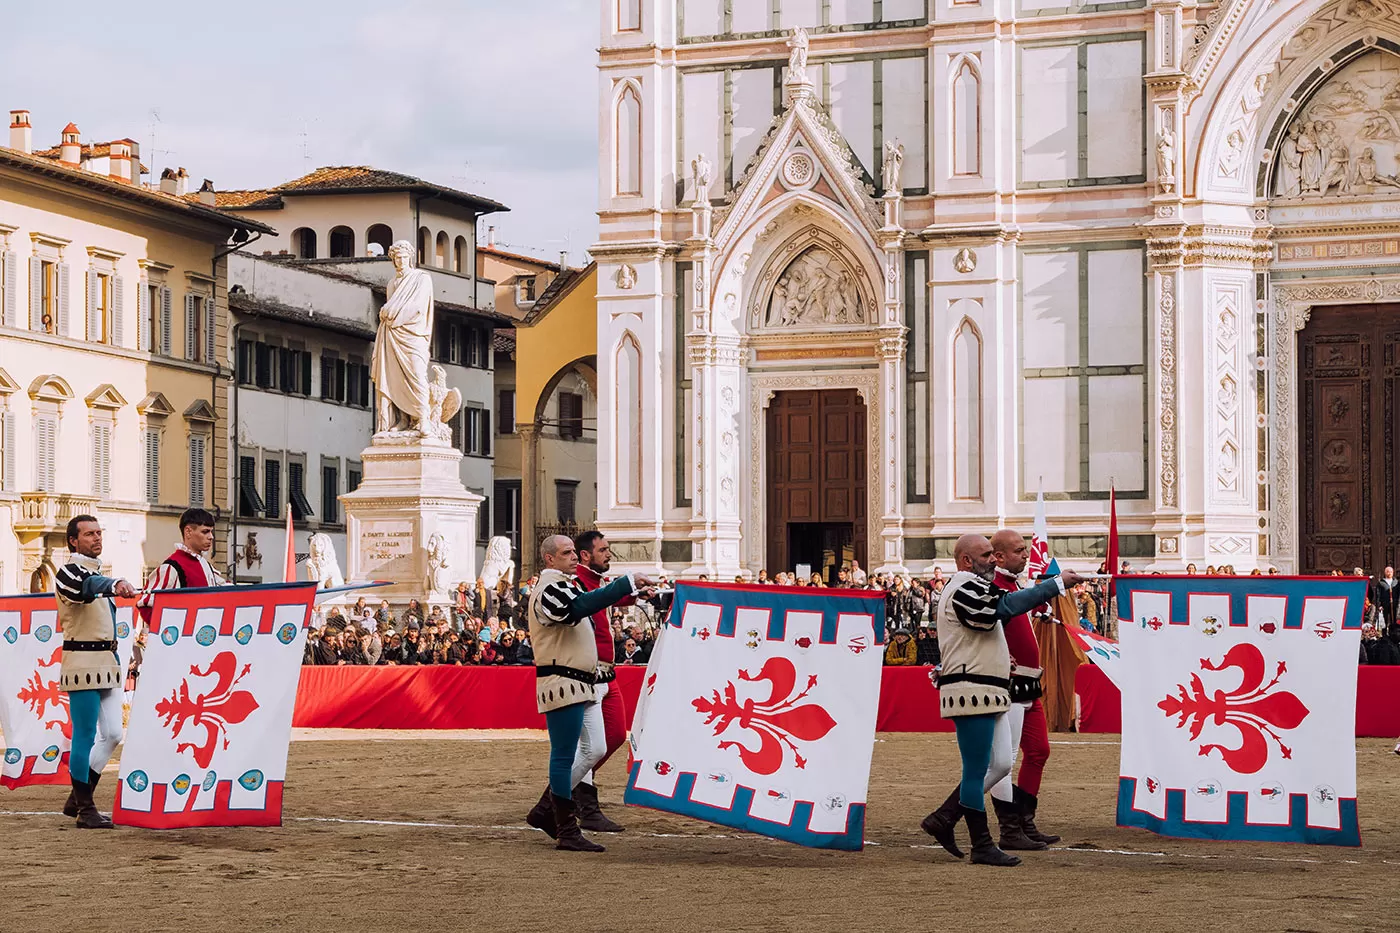 Best things to do in Florence - Il giglio fiorentino - Fleur-de-lis